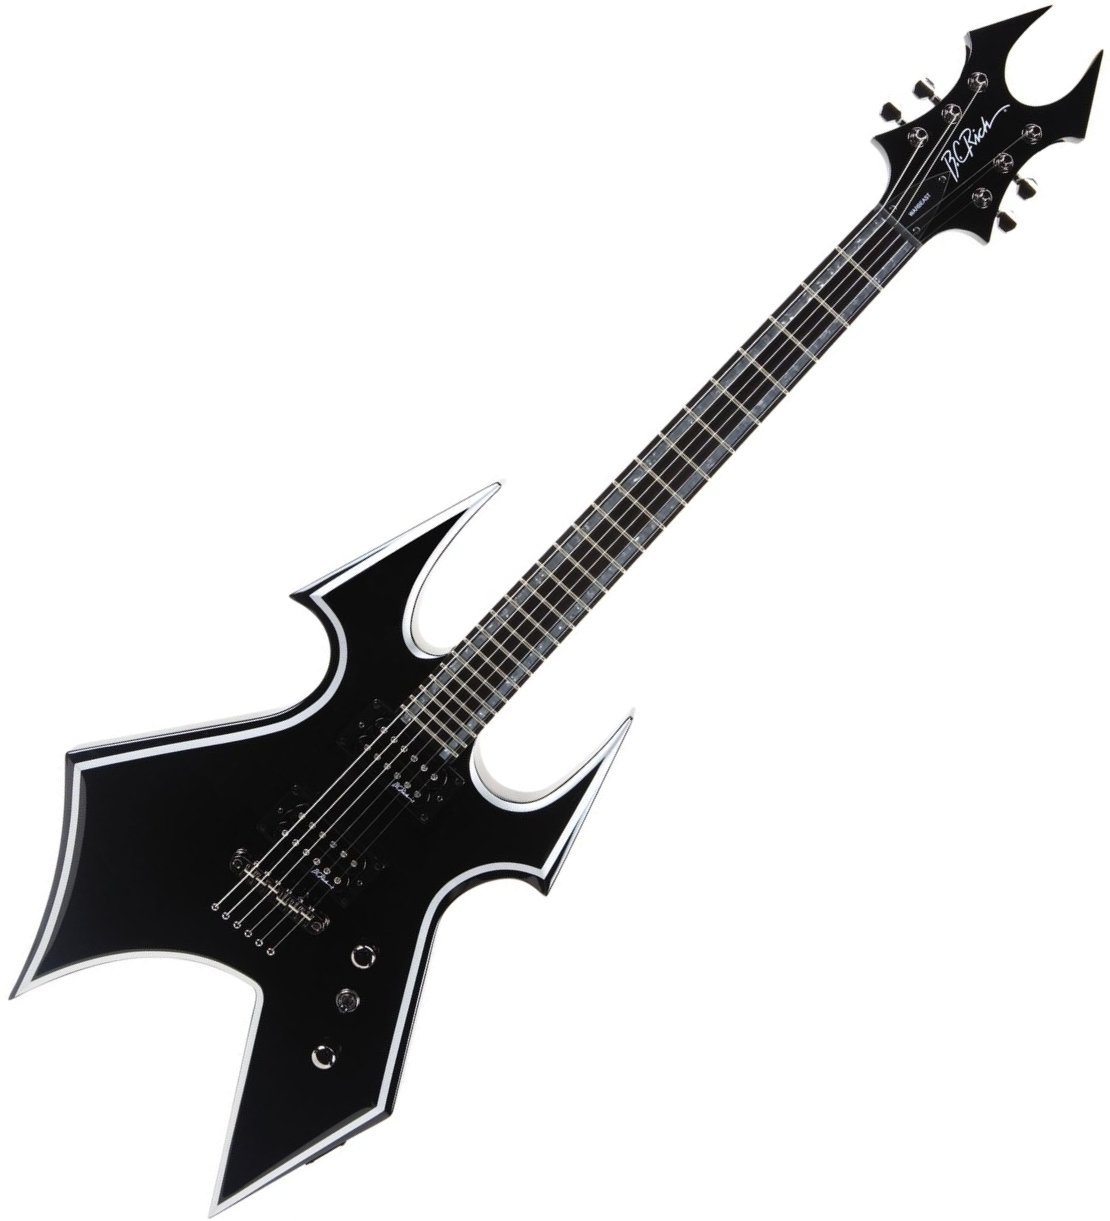 Electric guitar BC RICH TWBSTO Trace Warbeast Electric Guitar Onyx Black